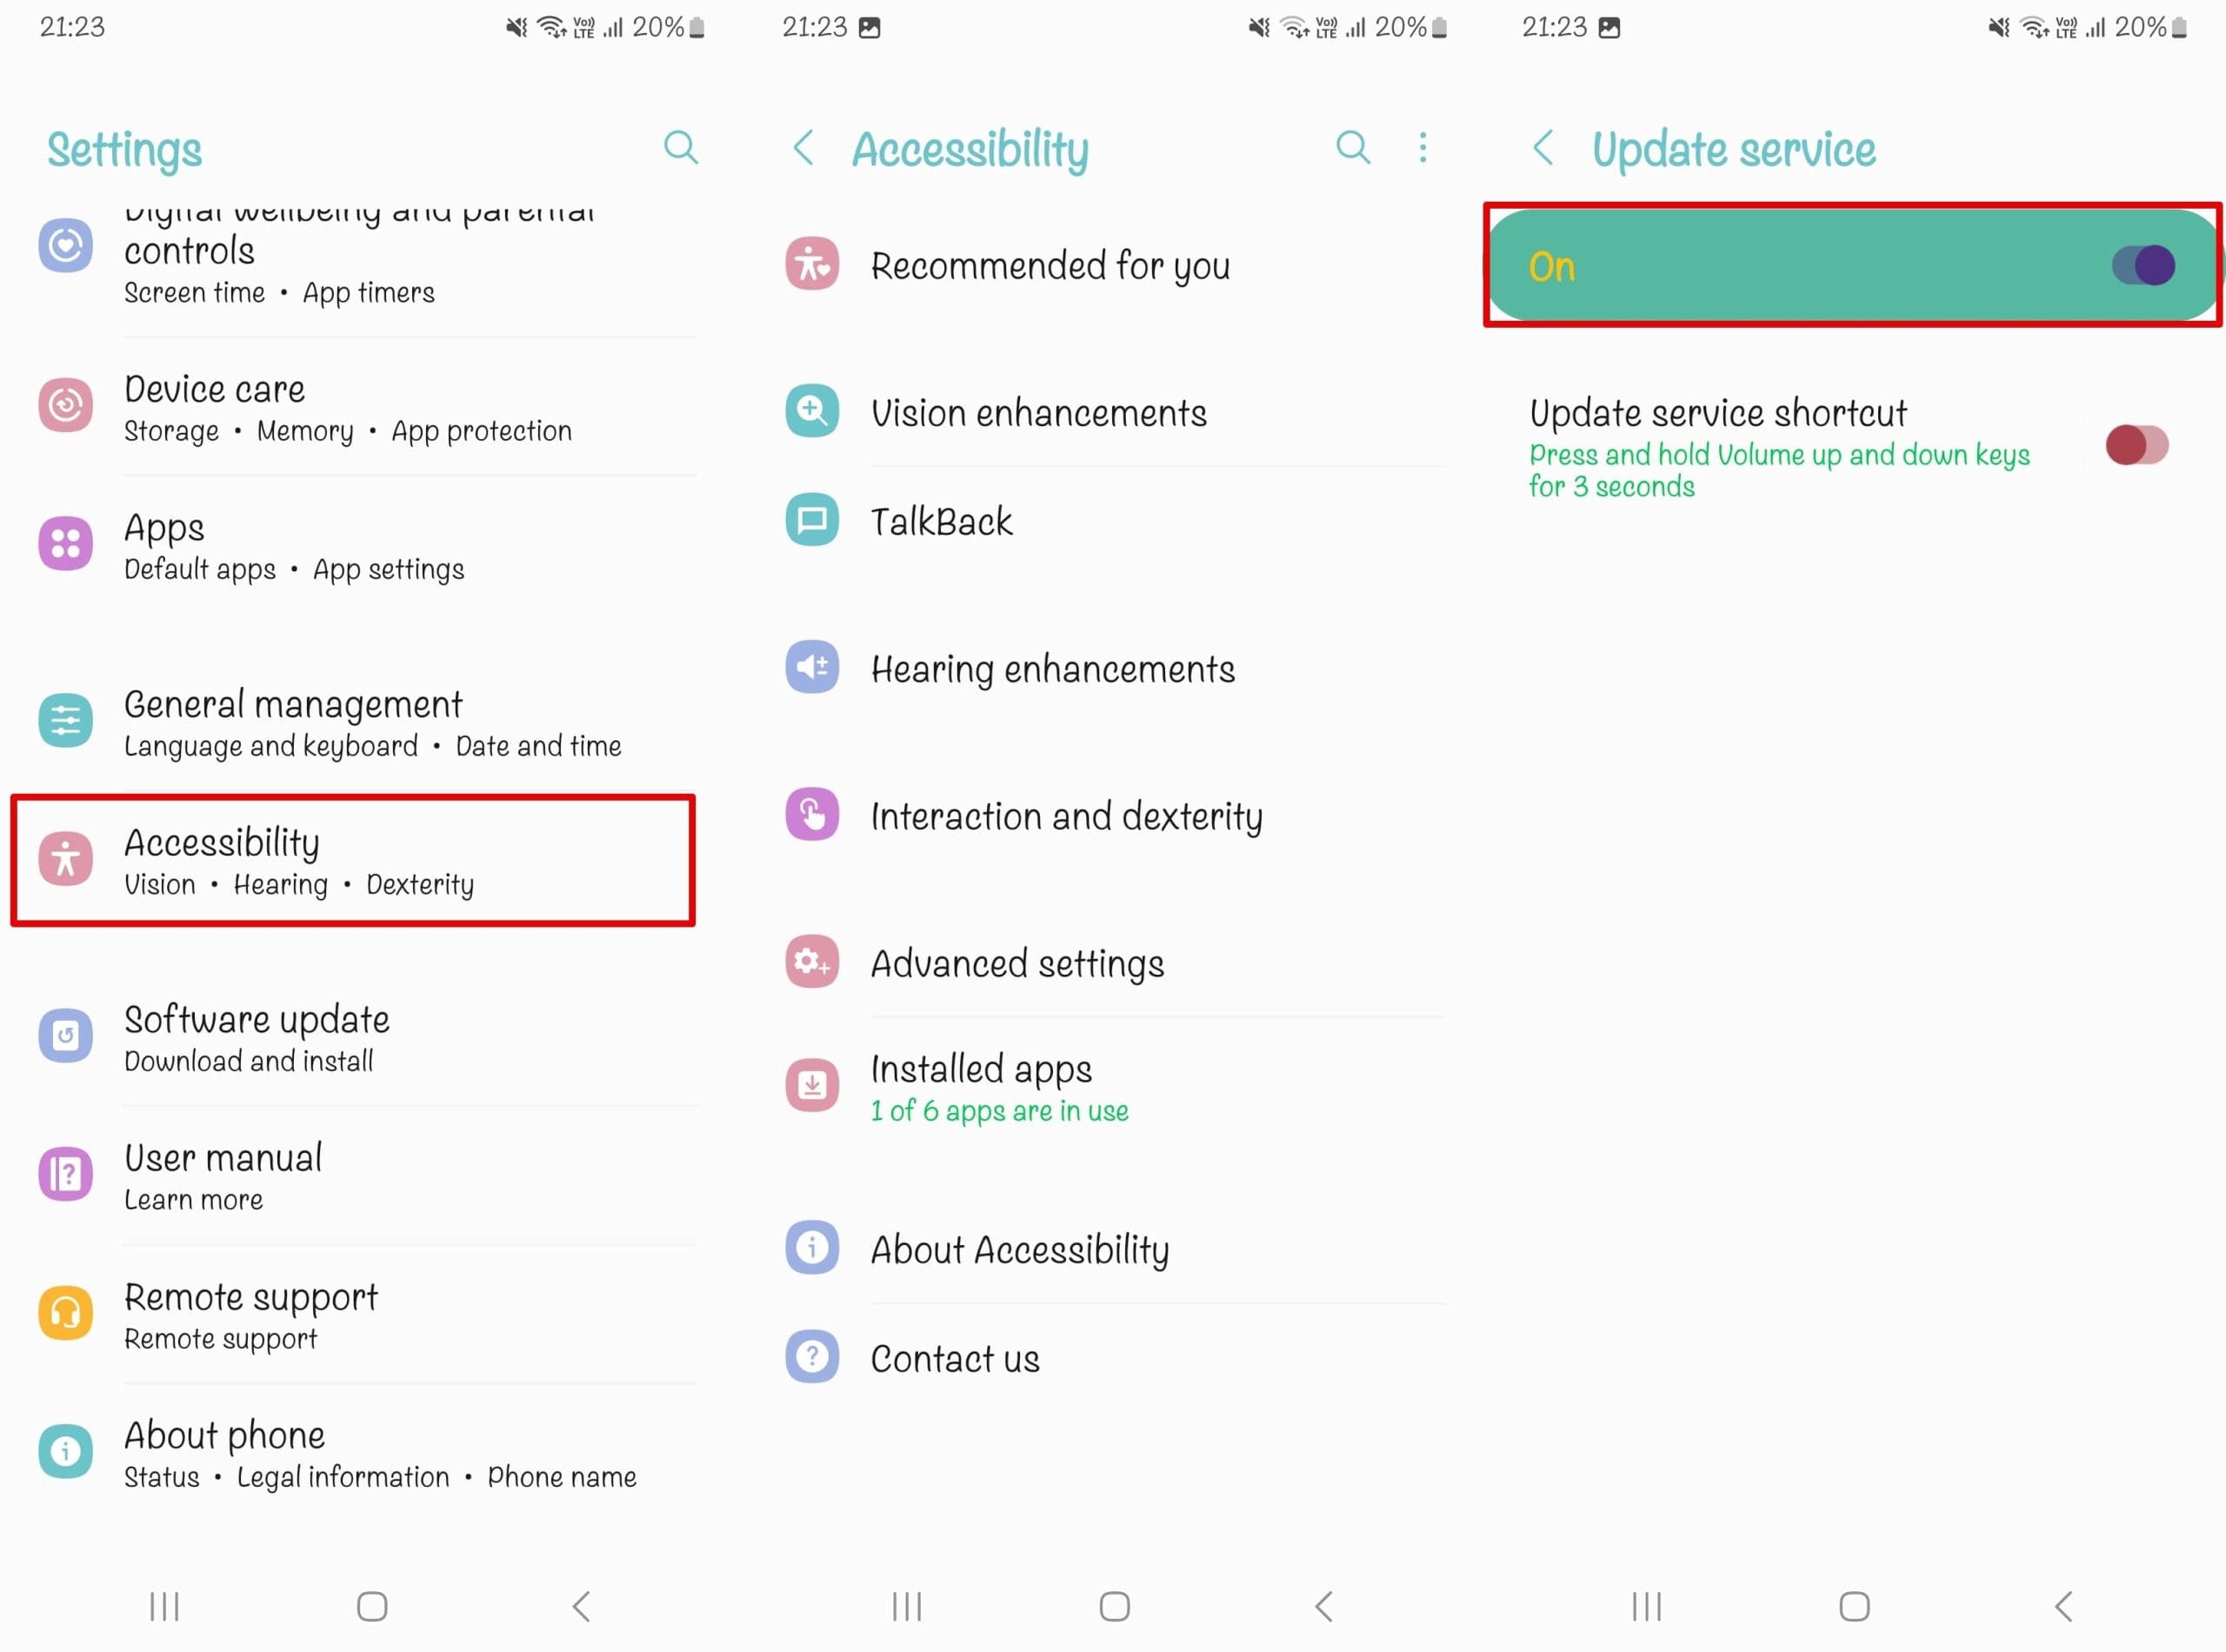 An image of allowing the Accessibility setting for the Update Service app